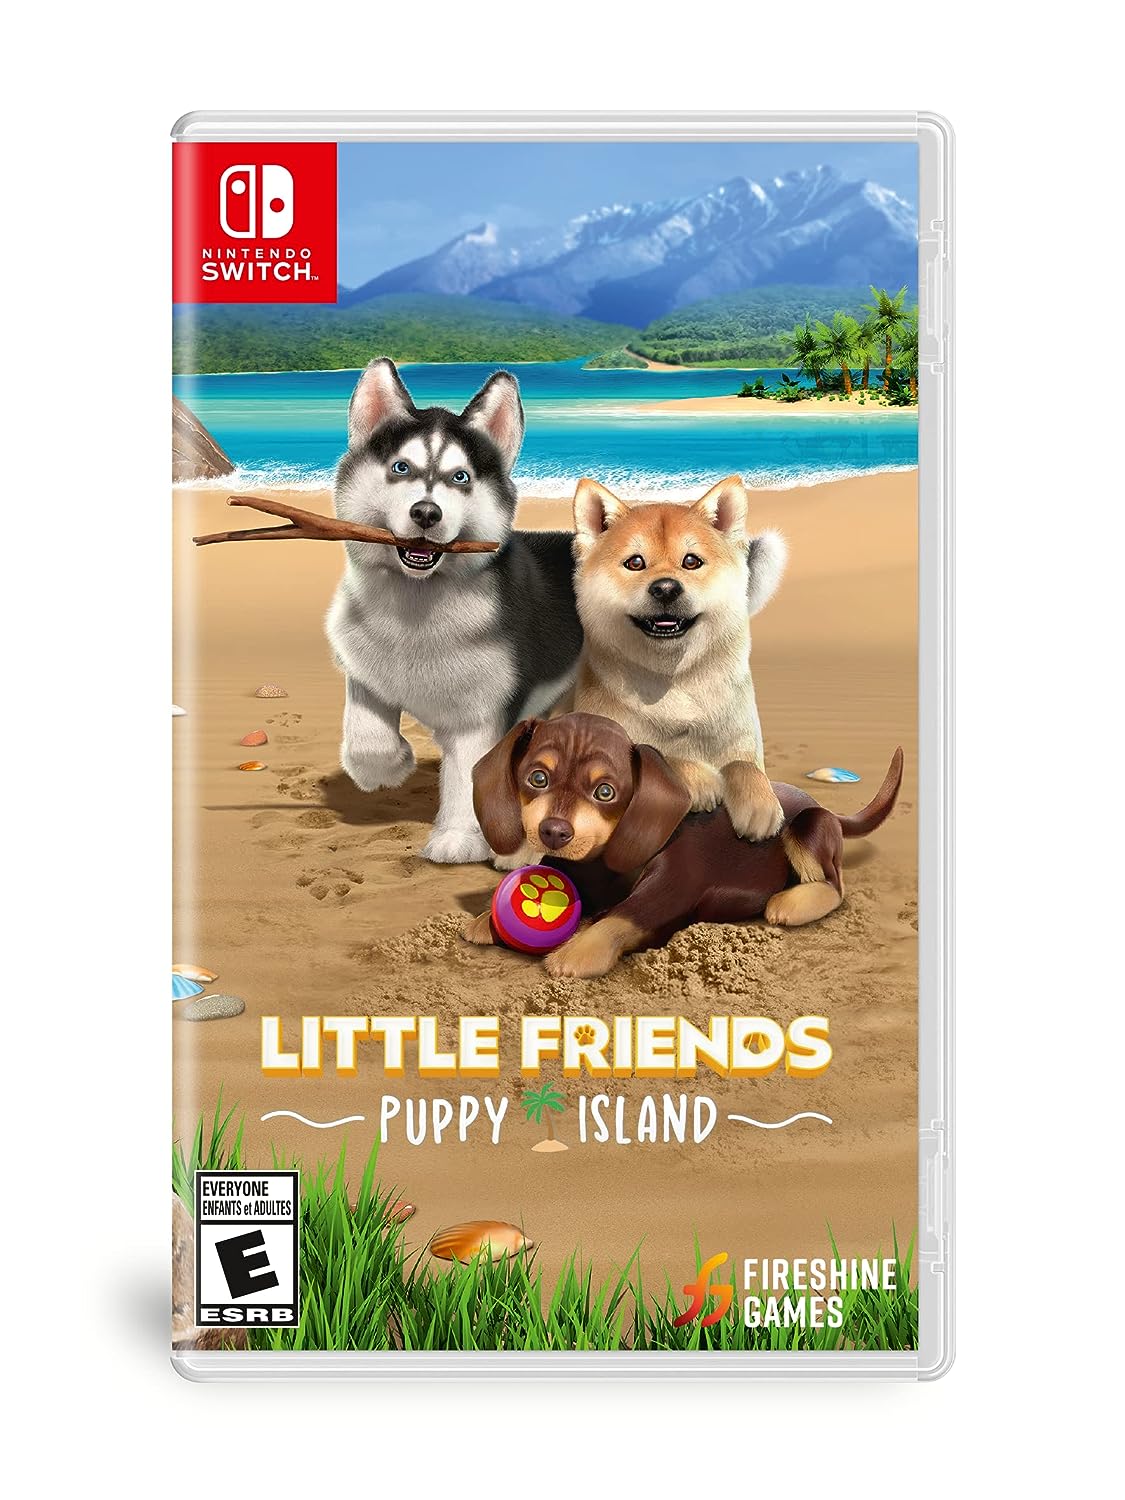 Puppy Paradise Awaits: Why 'Little Friends: Puppy Island' is the Ultimate Holiday Gift for Families 23